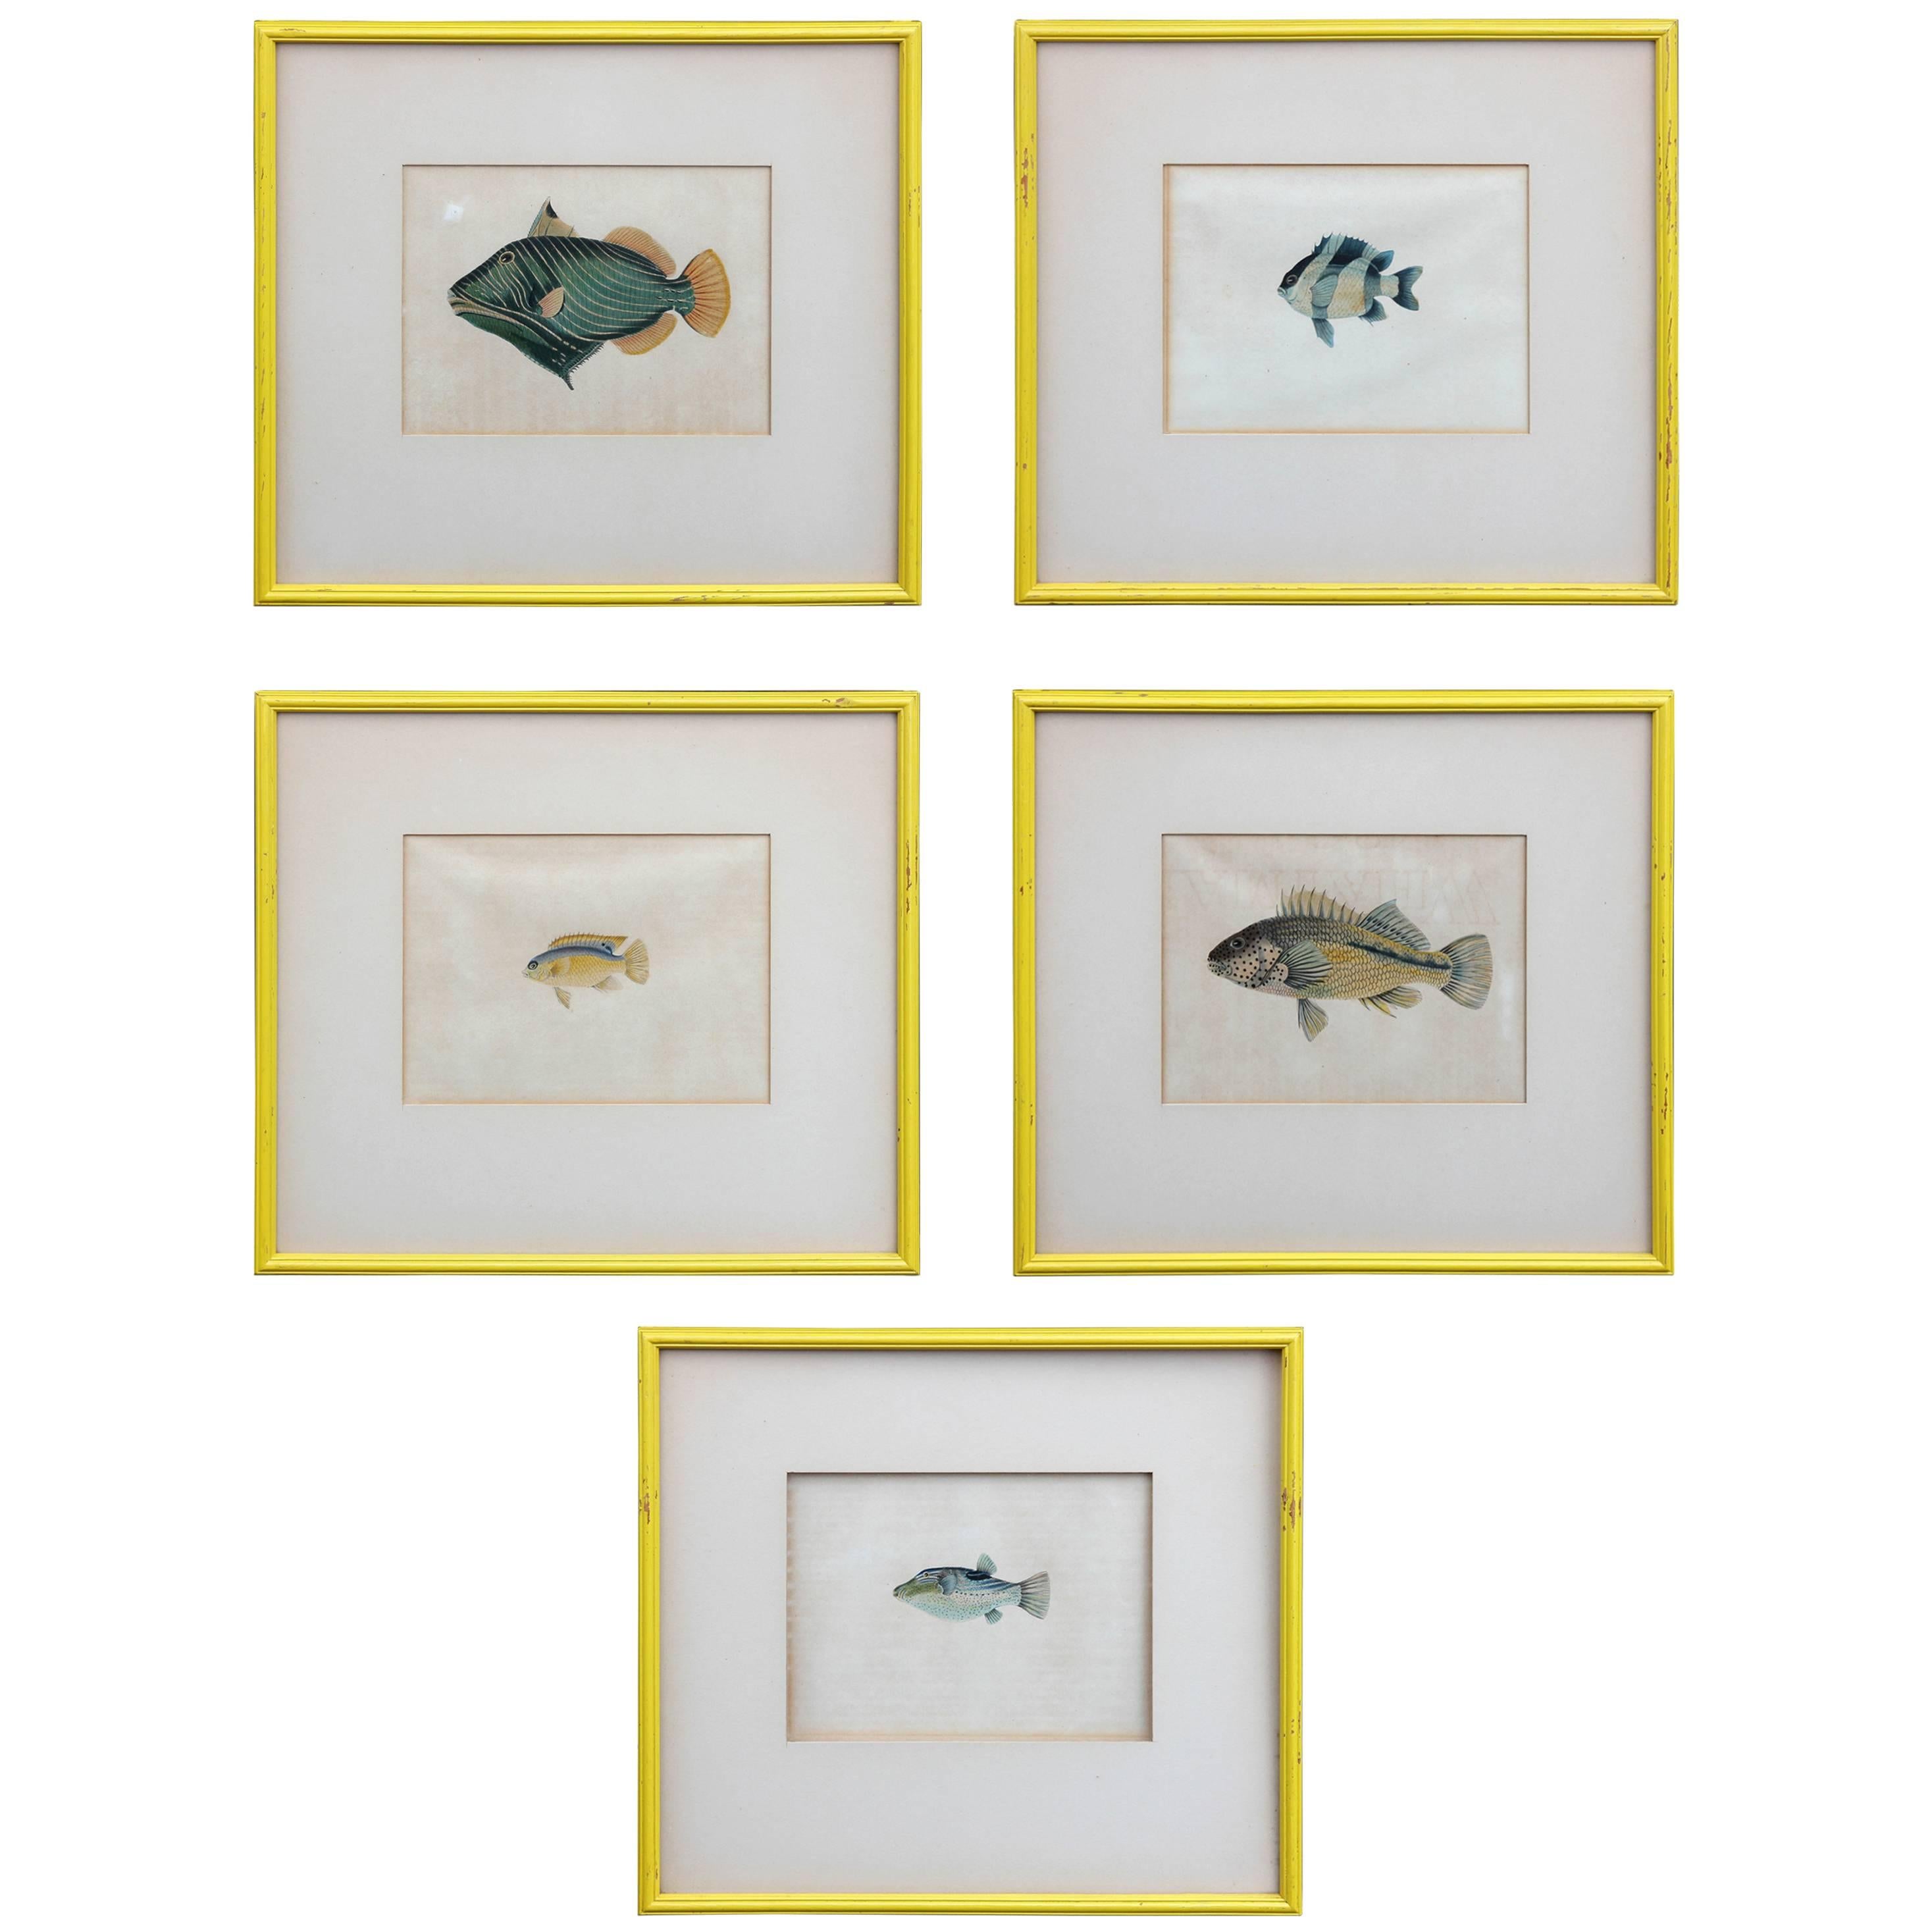 Early Hand-Colored 19th Century Fish Prints Set of Five